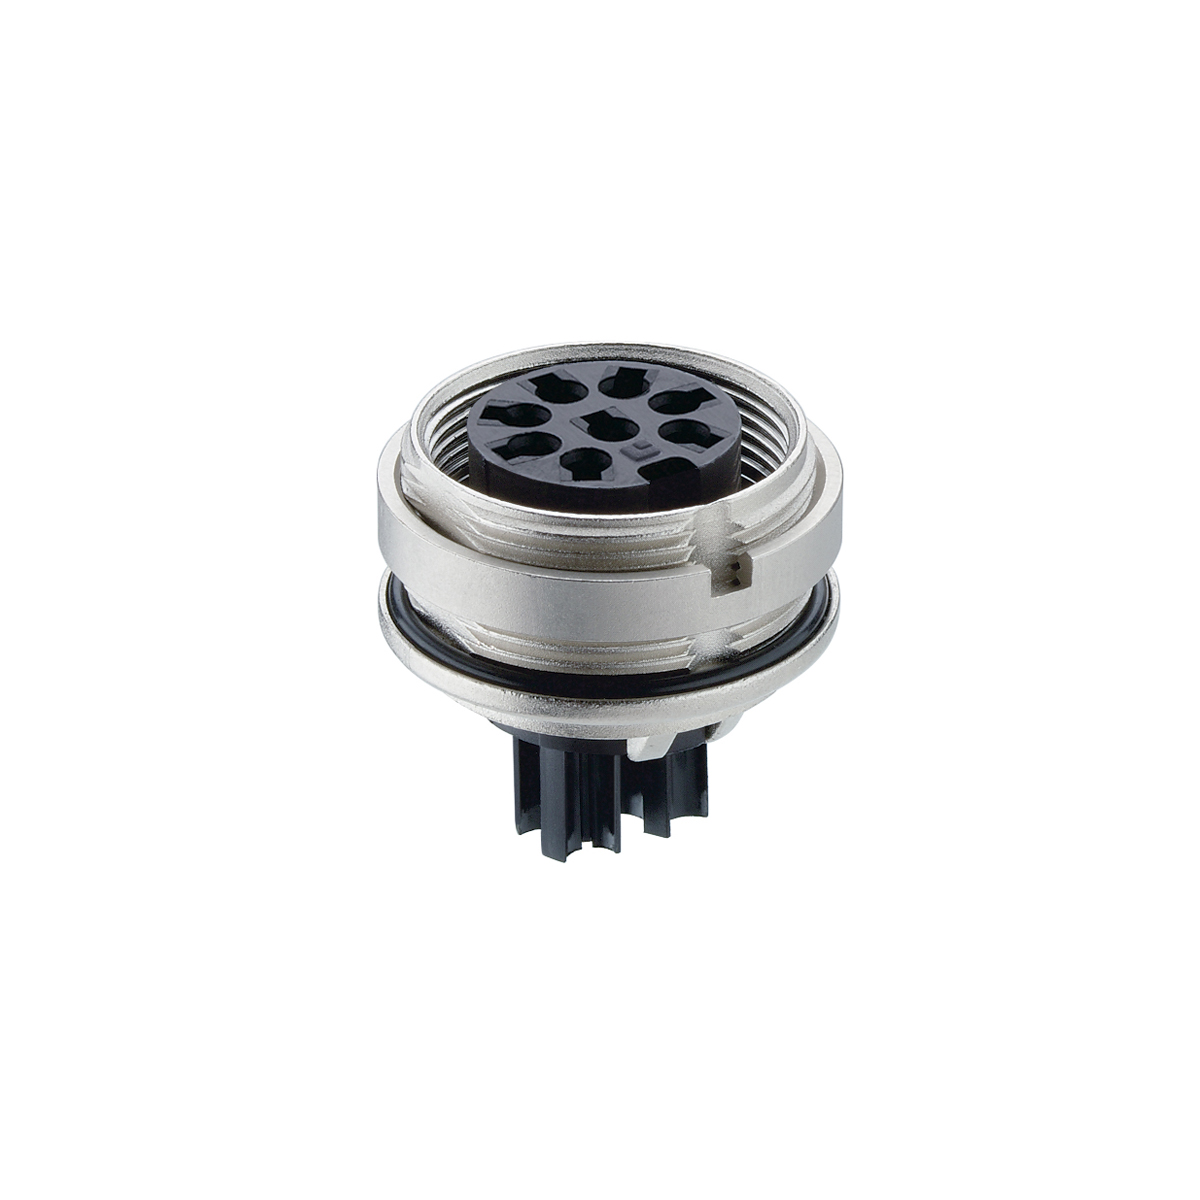 Lumberg: 363 (Series 03 | Circular connectors with threaded joint M16 acc. to IEC 61076-2-106, IP40/IP68)